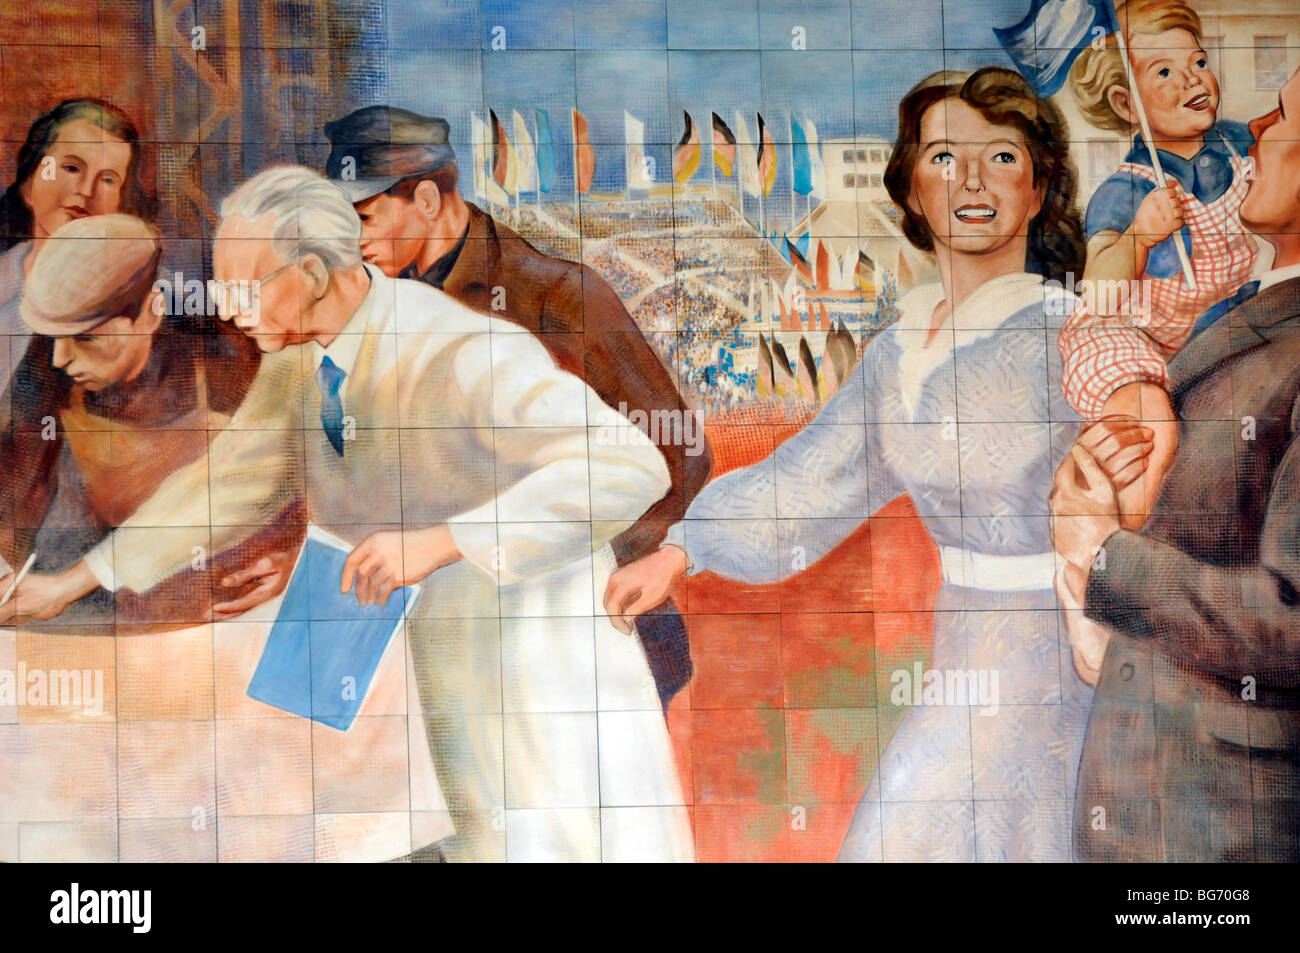 Mural depicting virtues of socialism on the Bundesministerium der finanzen (Federal Ministry of Finance), Berlin. Stock Photo